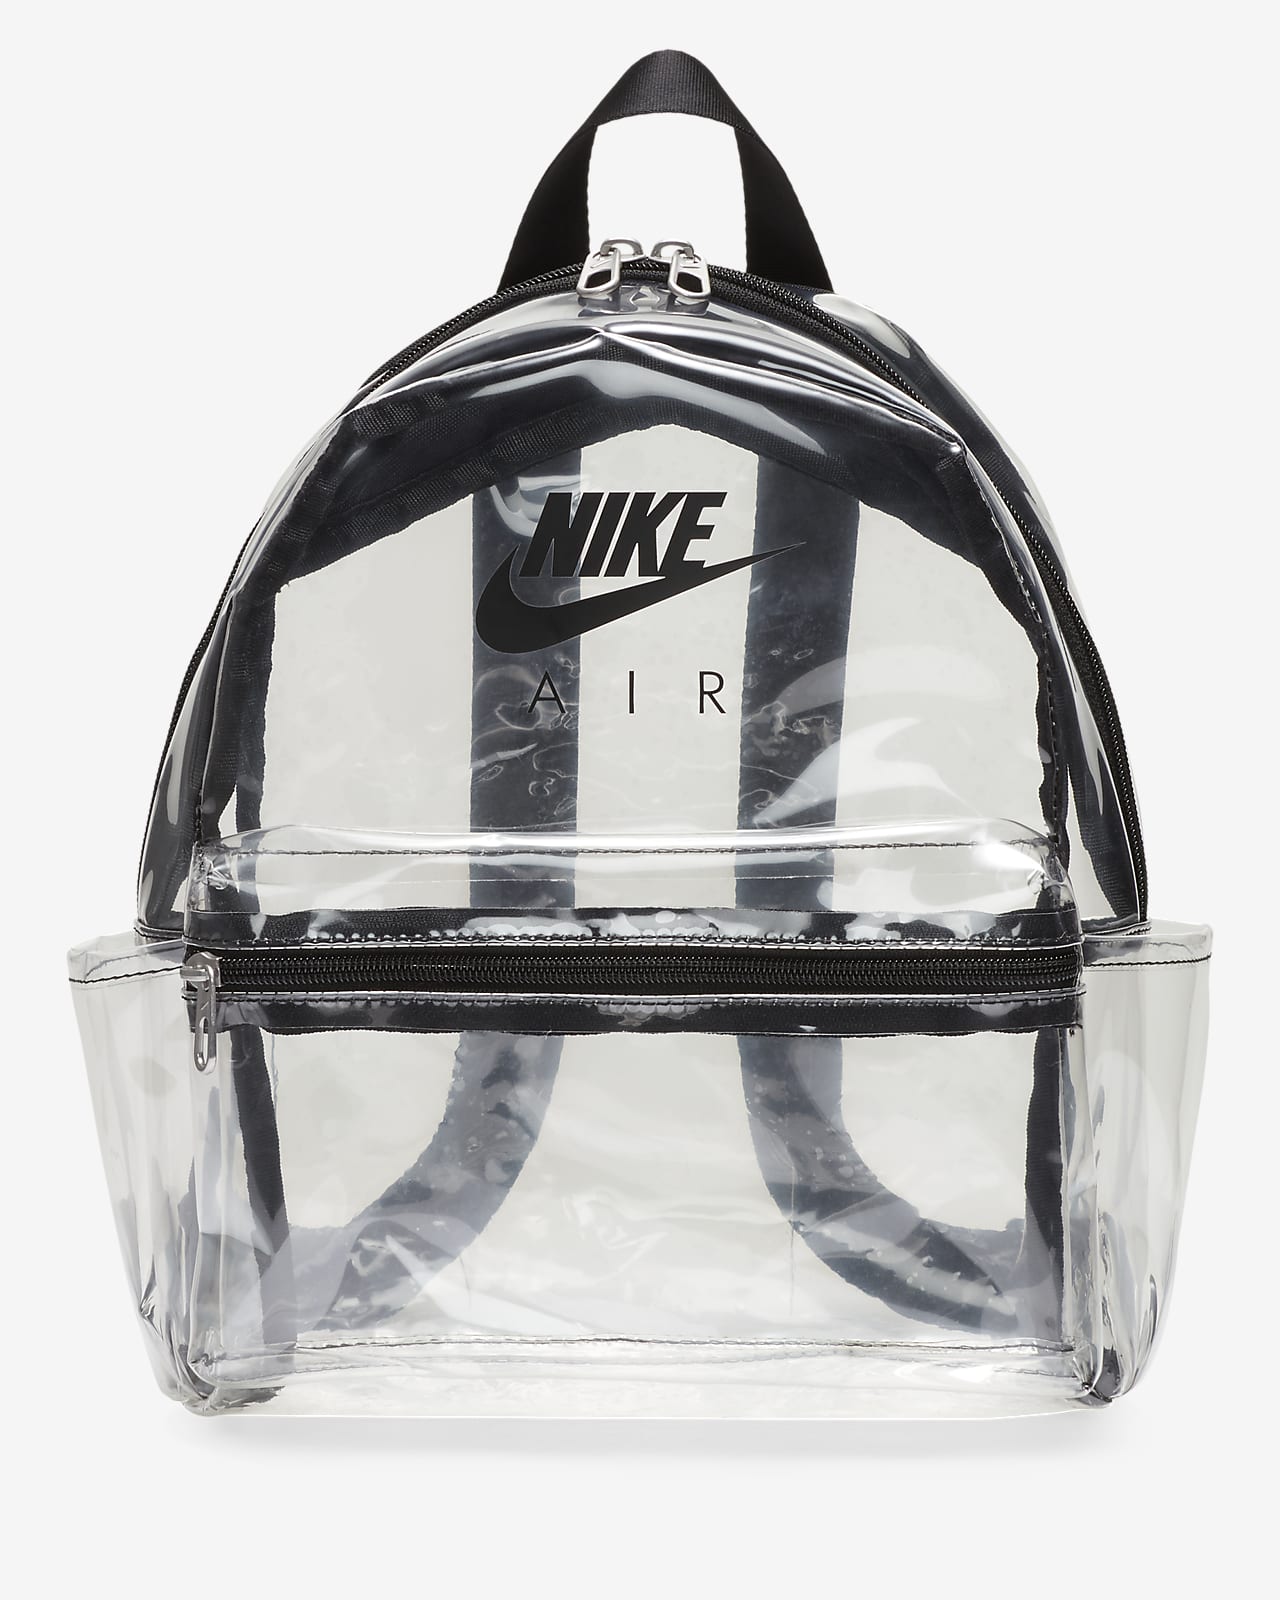 nike backpack small size